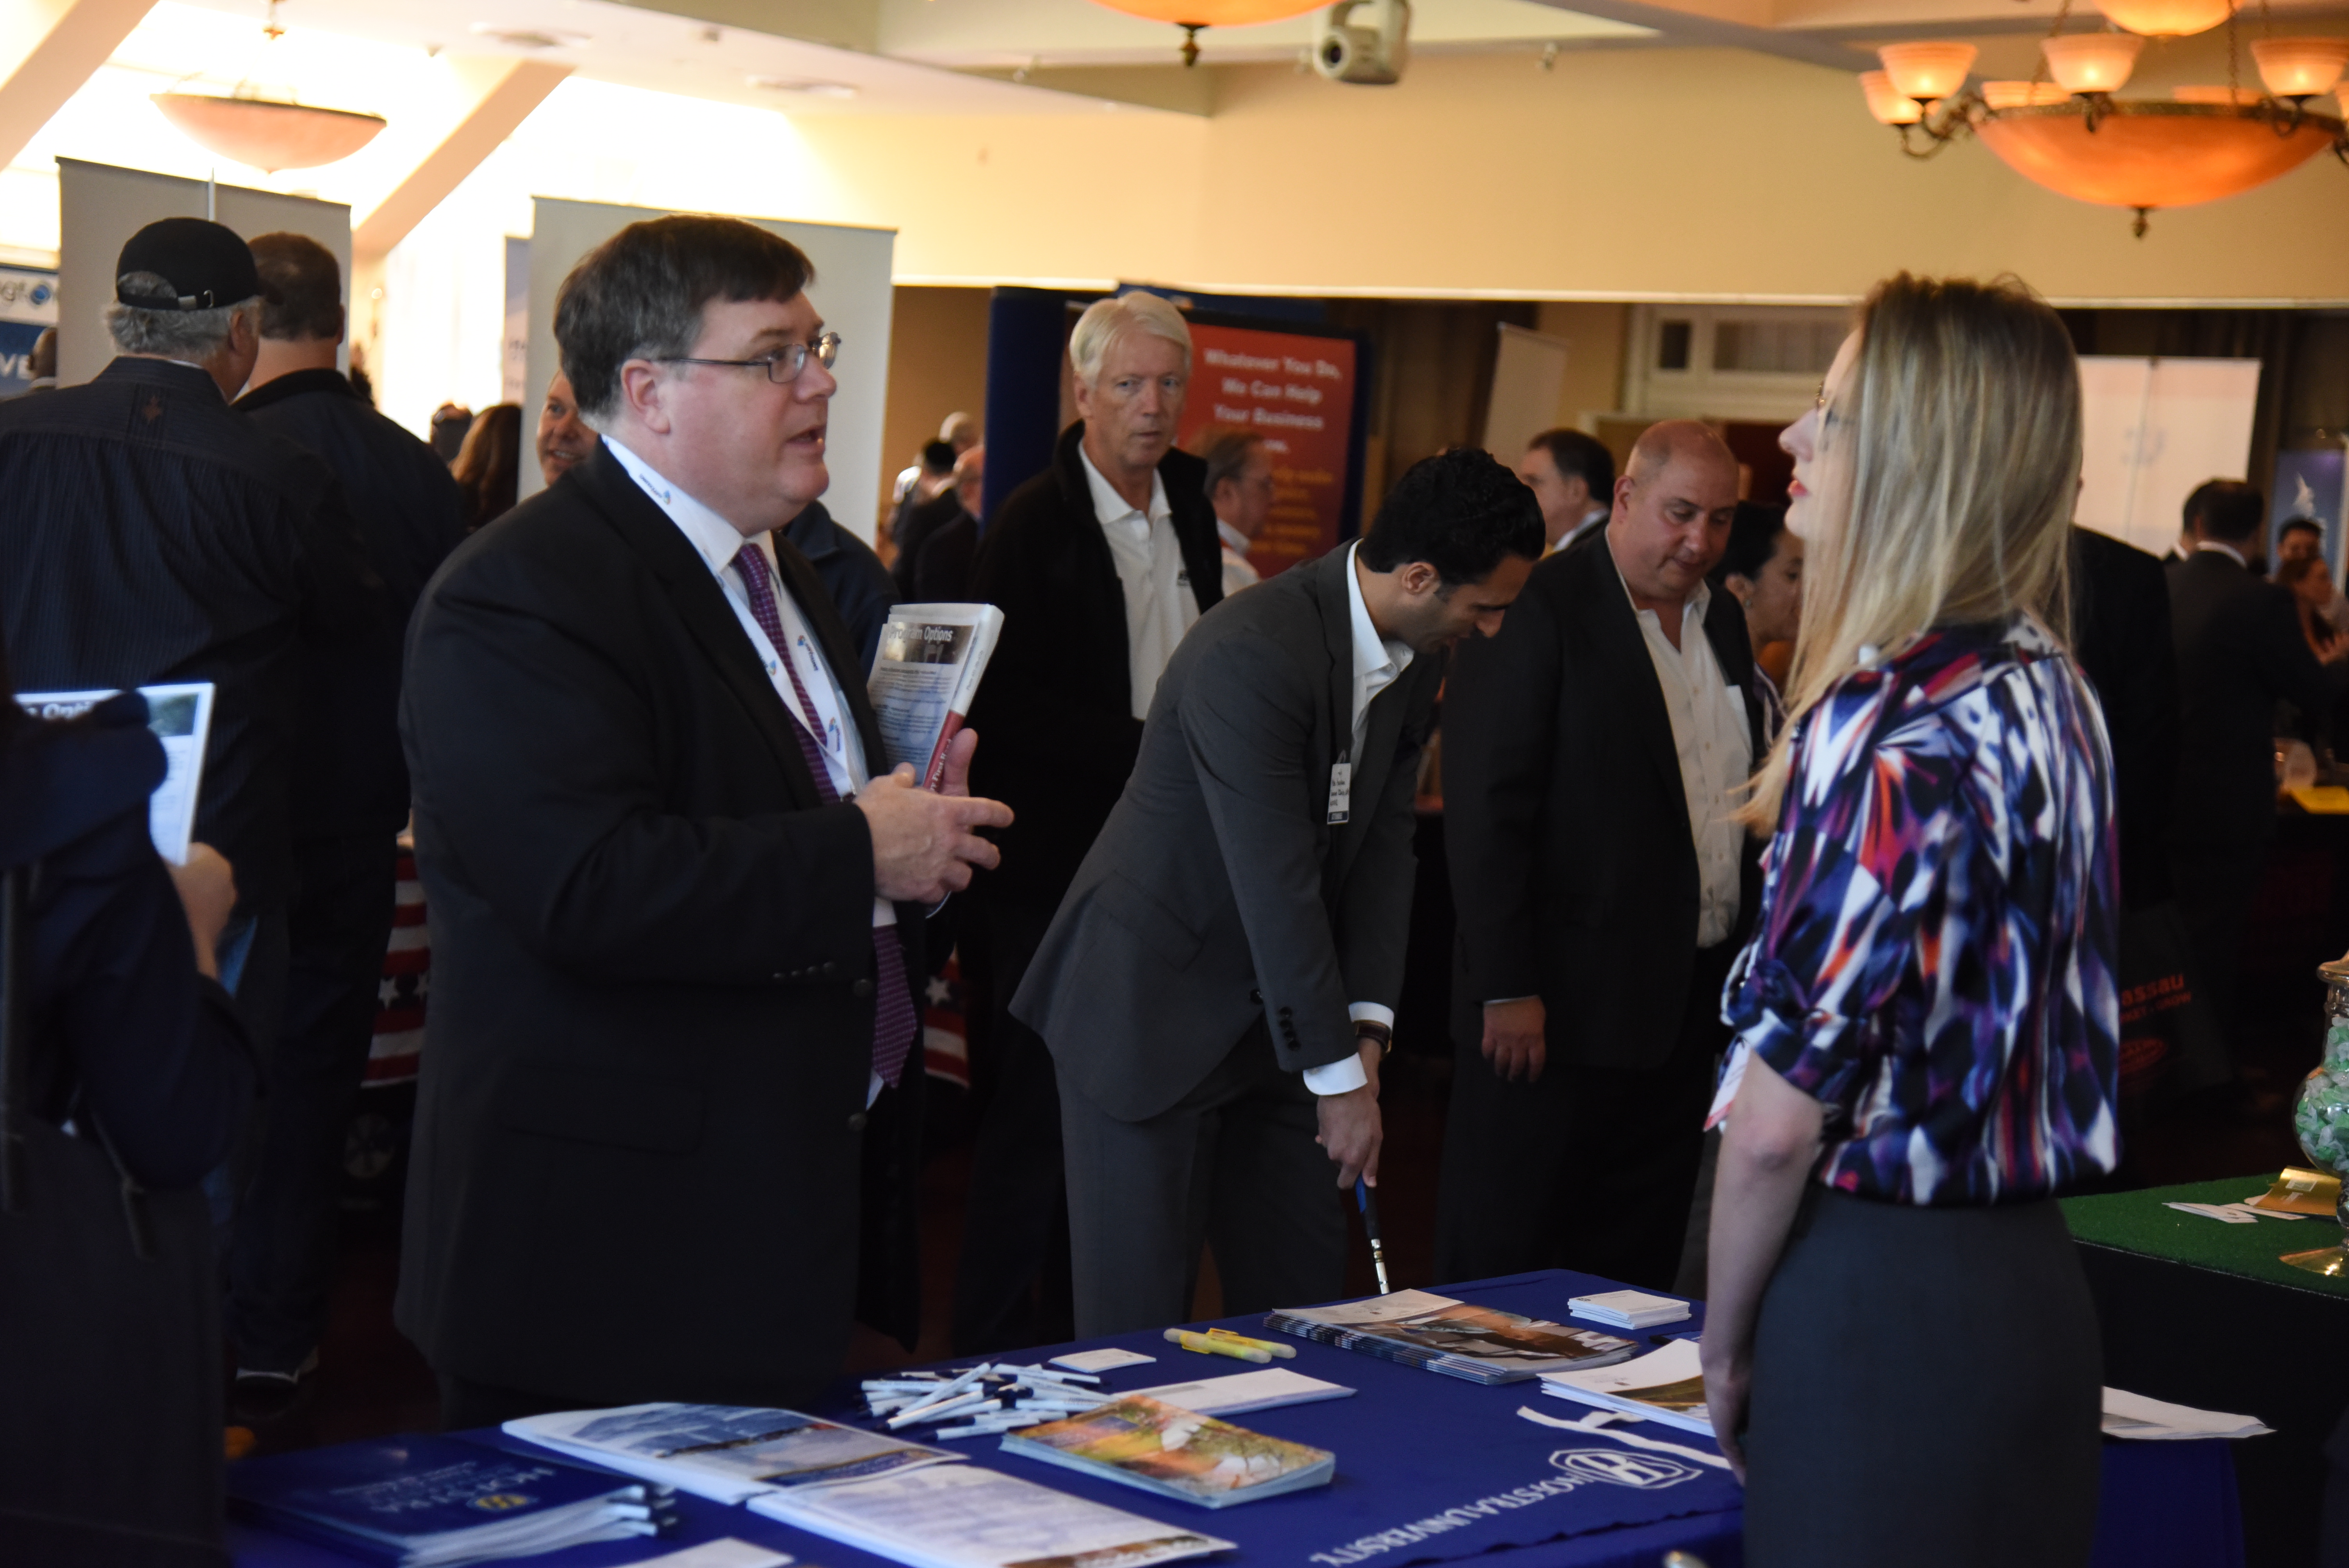 Trade show attendees at Trade Nassau in Farmingdale, NY on Oct. 21, 2015.